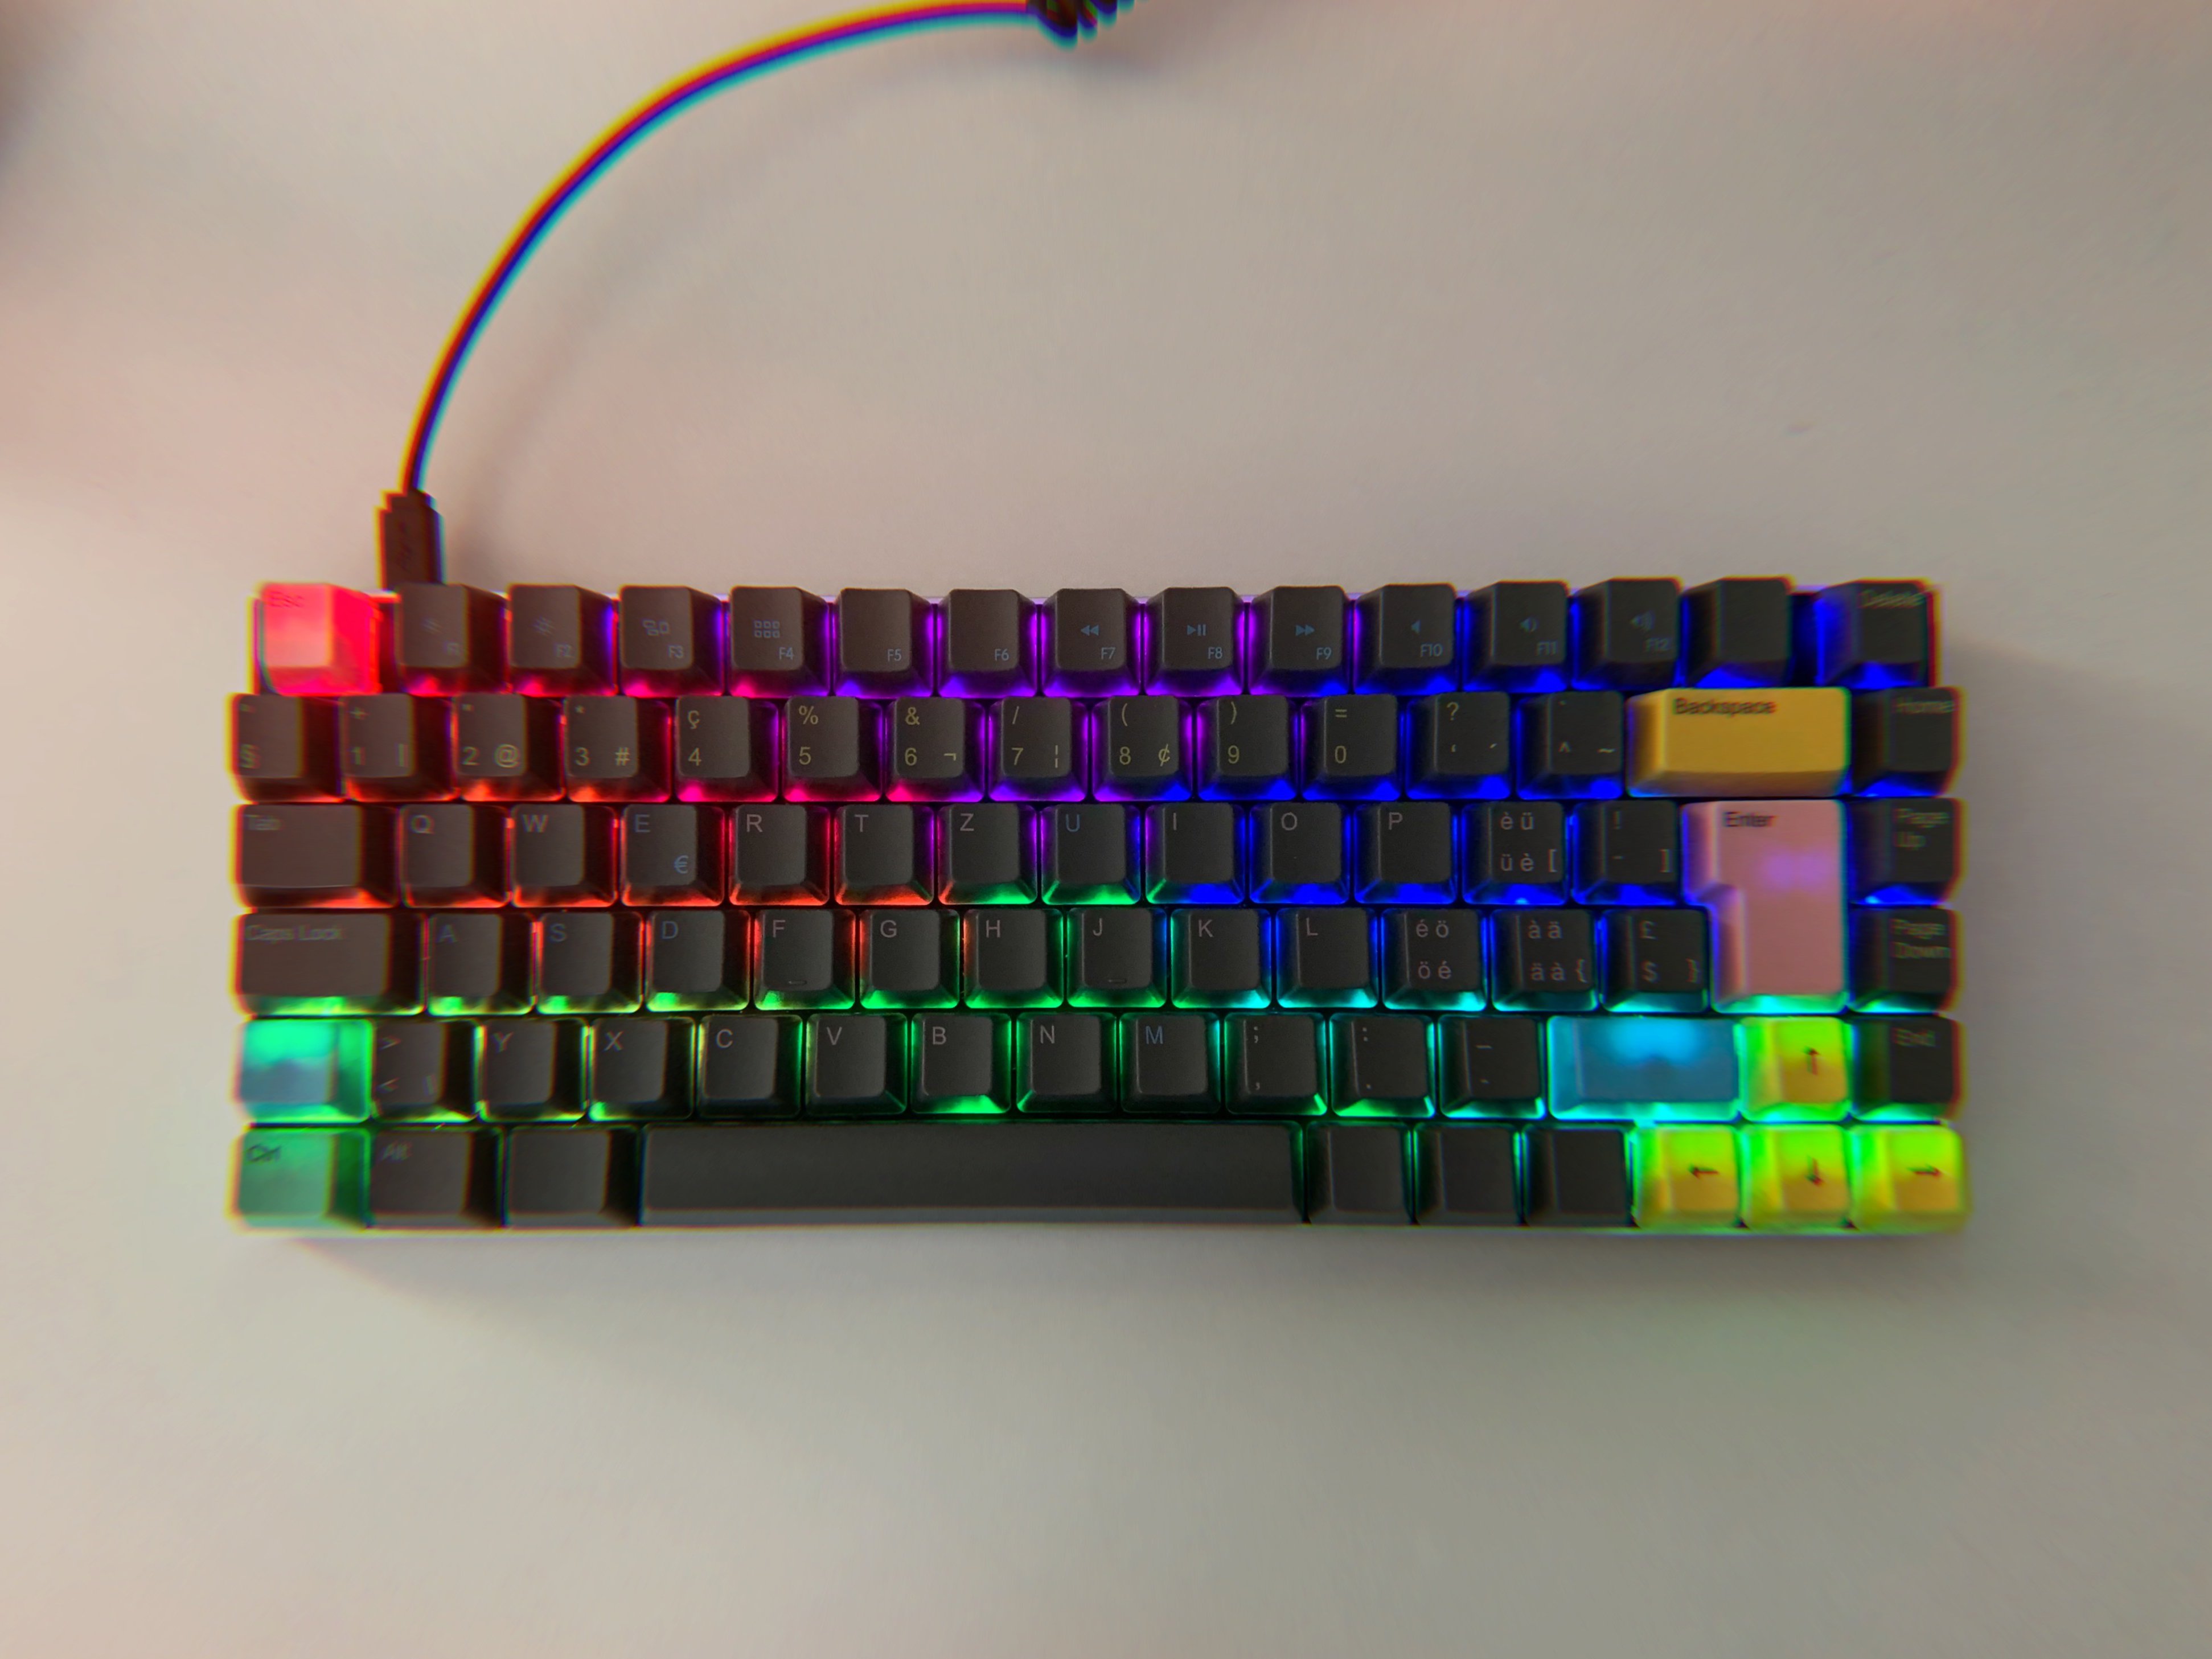 Allmost perfect keyboard